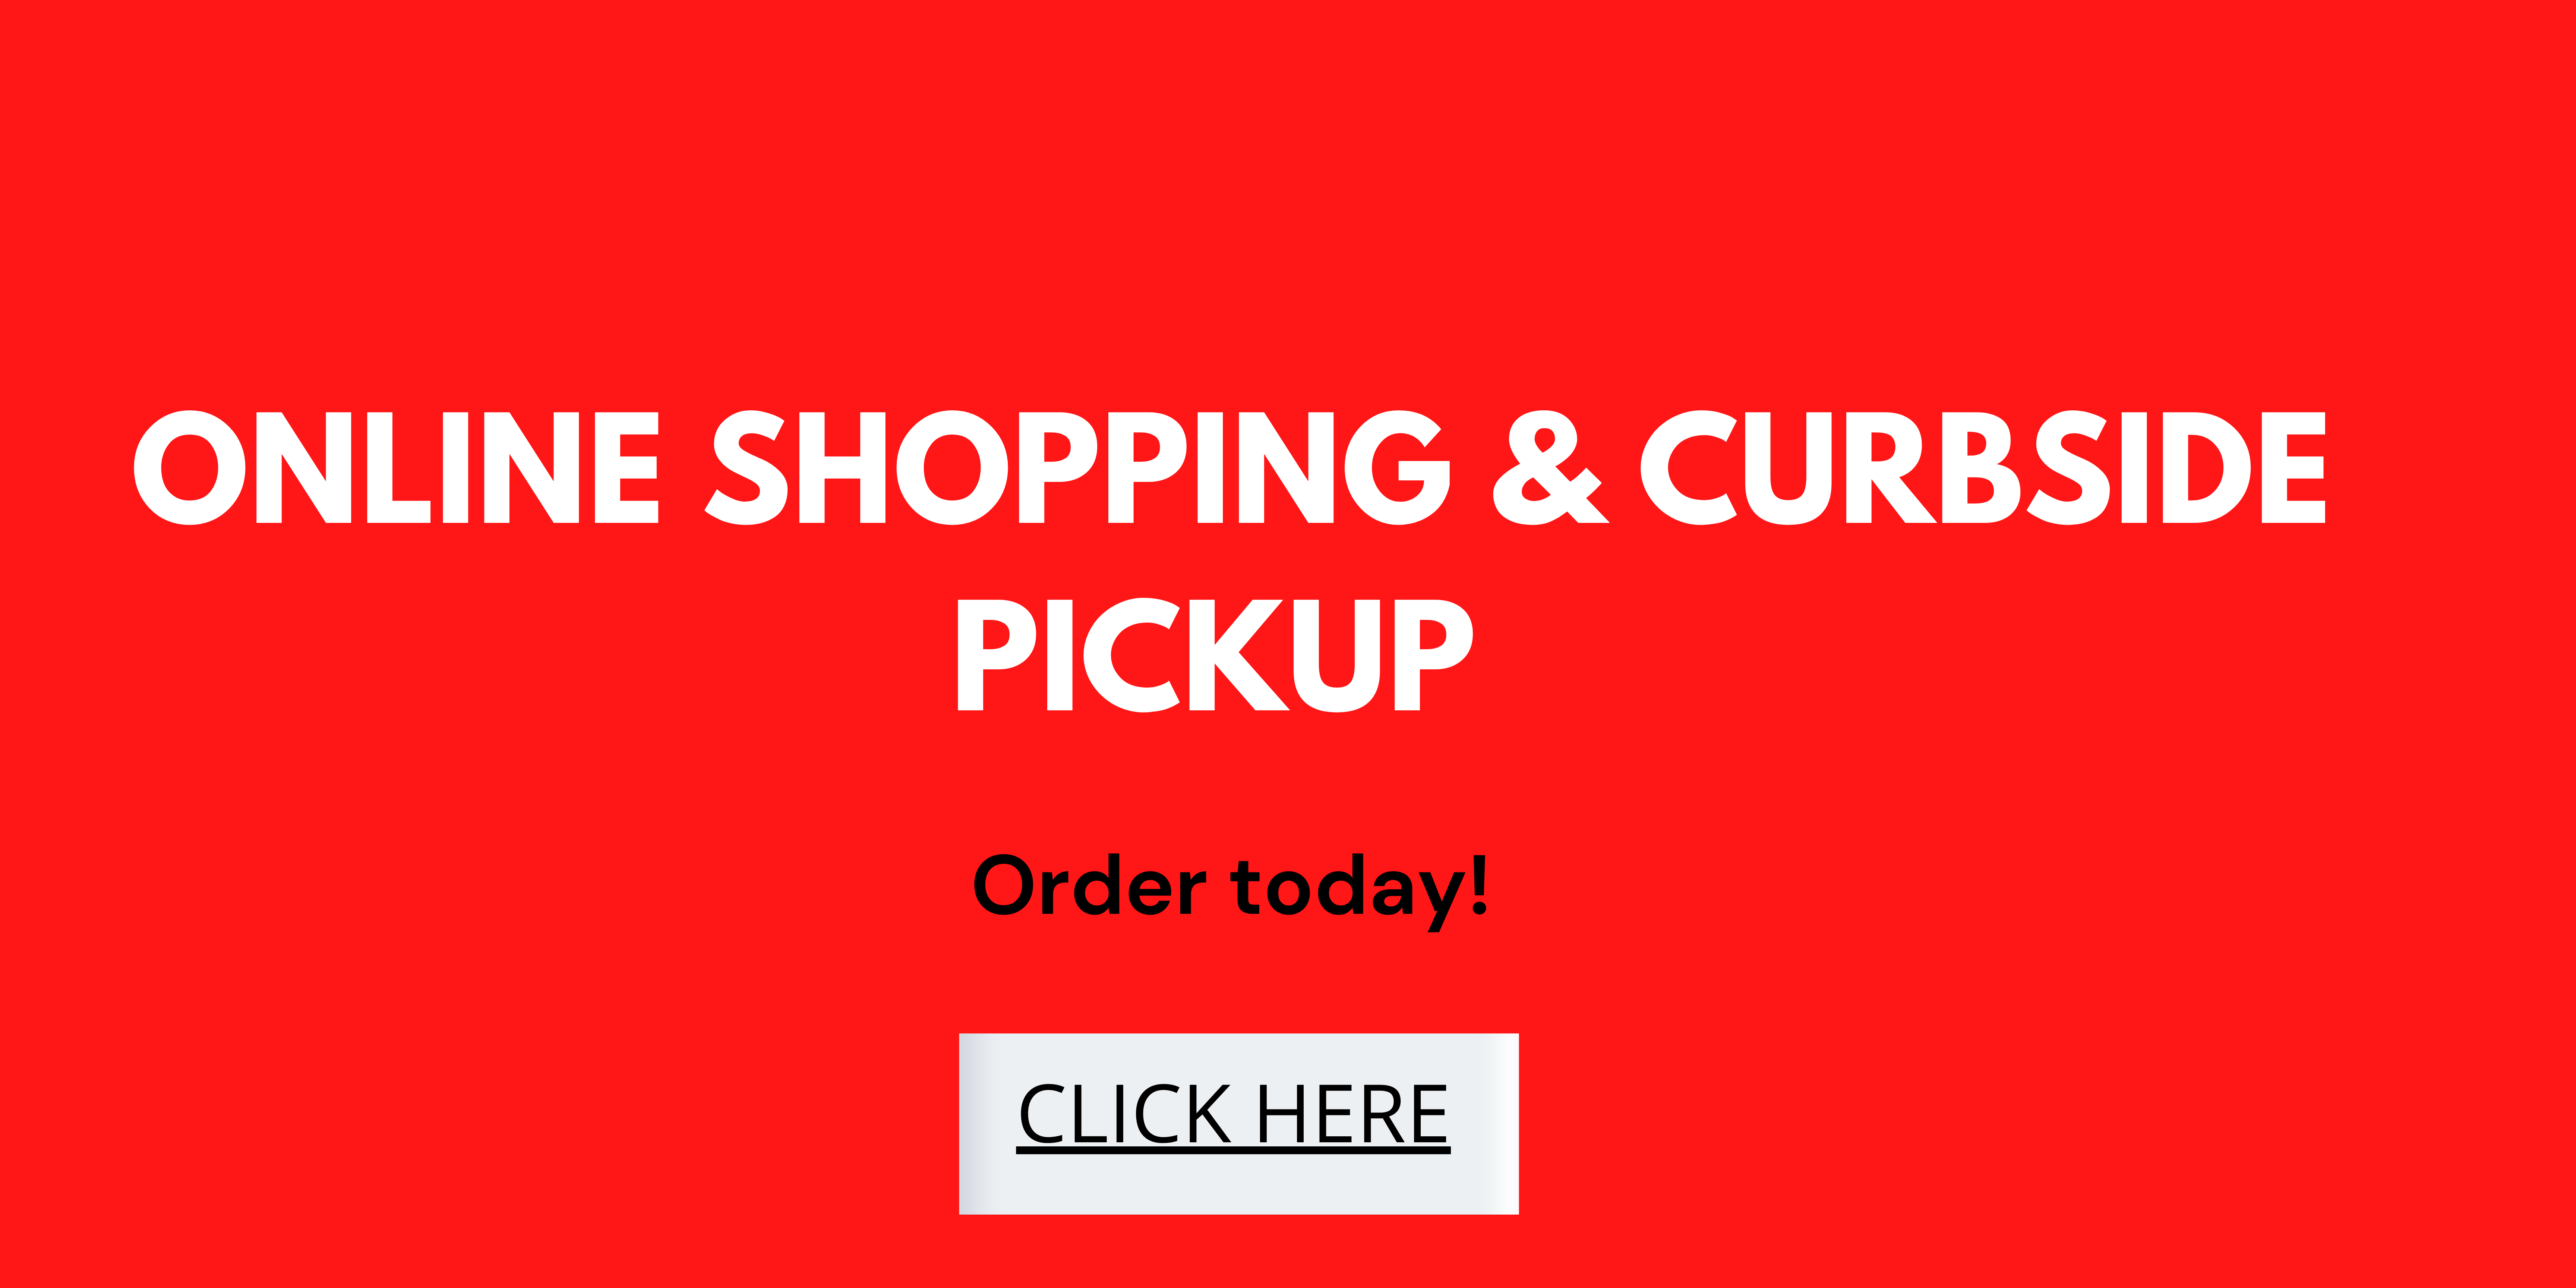 ONLINE SHOPPING & CURBSIDE PICKUP (1)